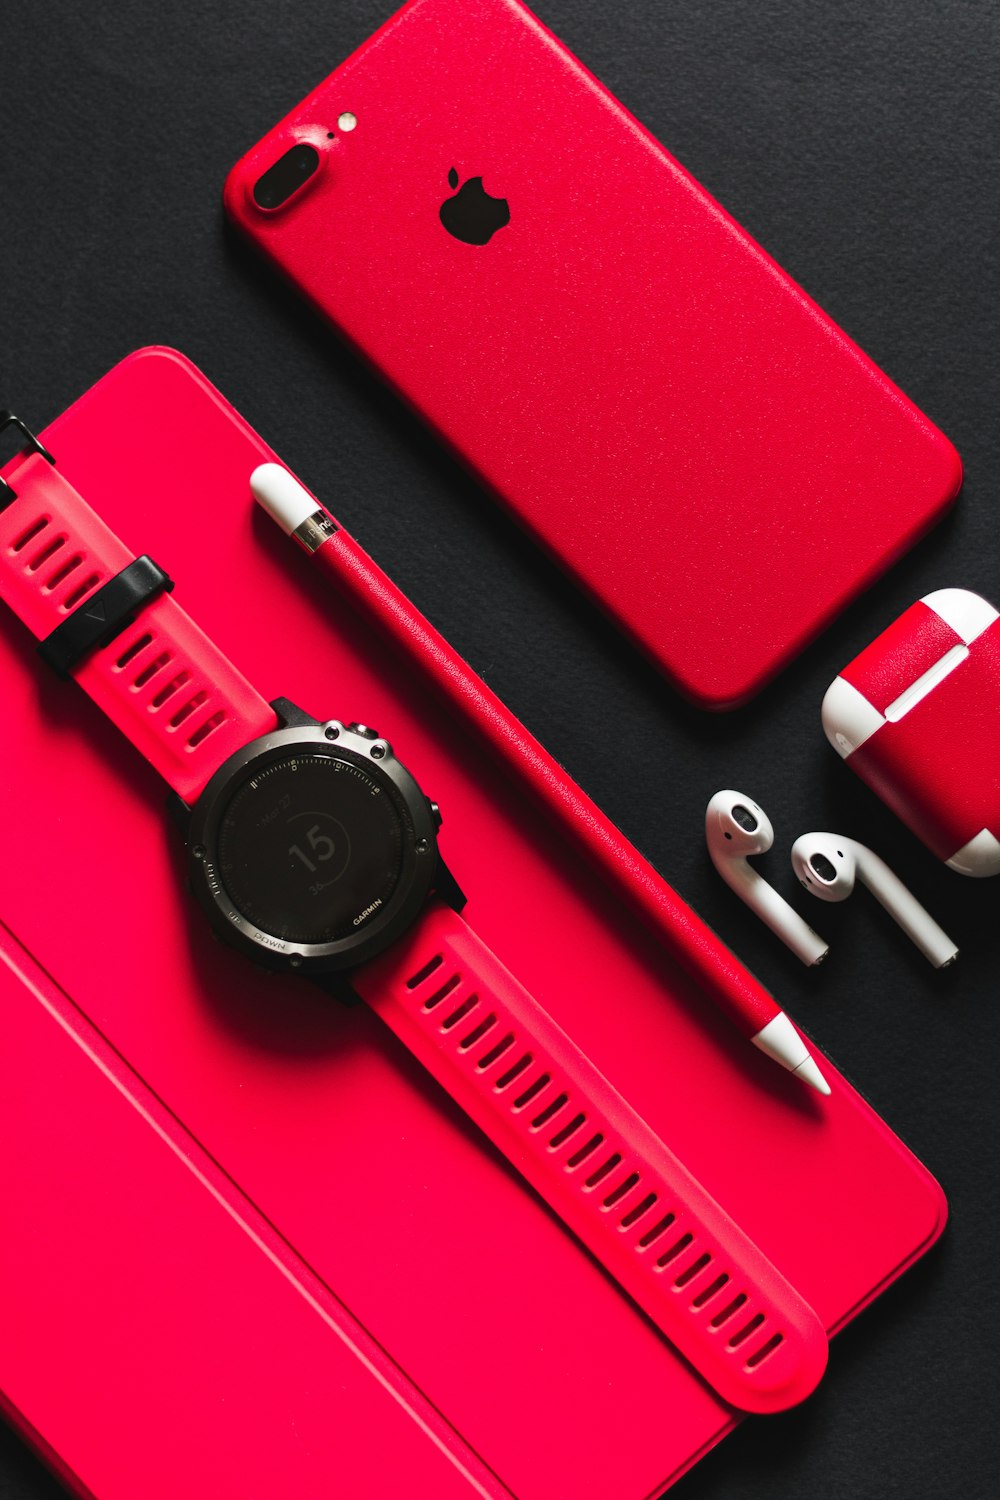 smartwatch, stylus, AirPods, and product red iPhone 7 on black surface